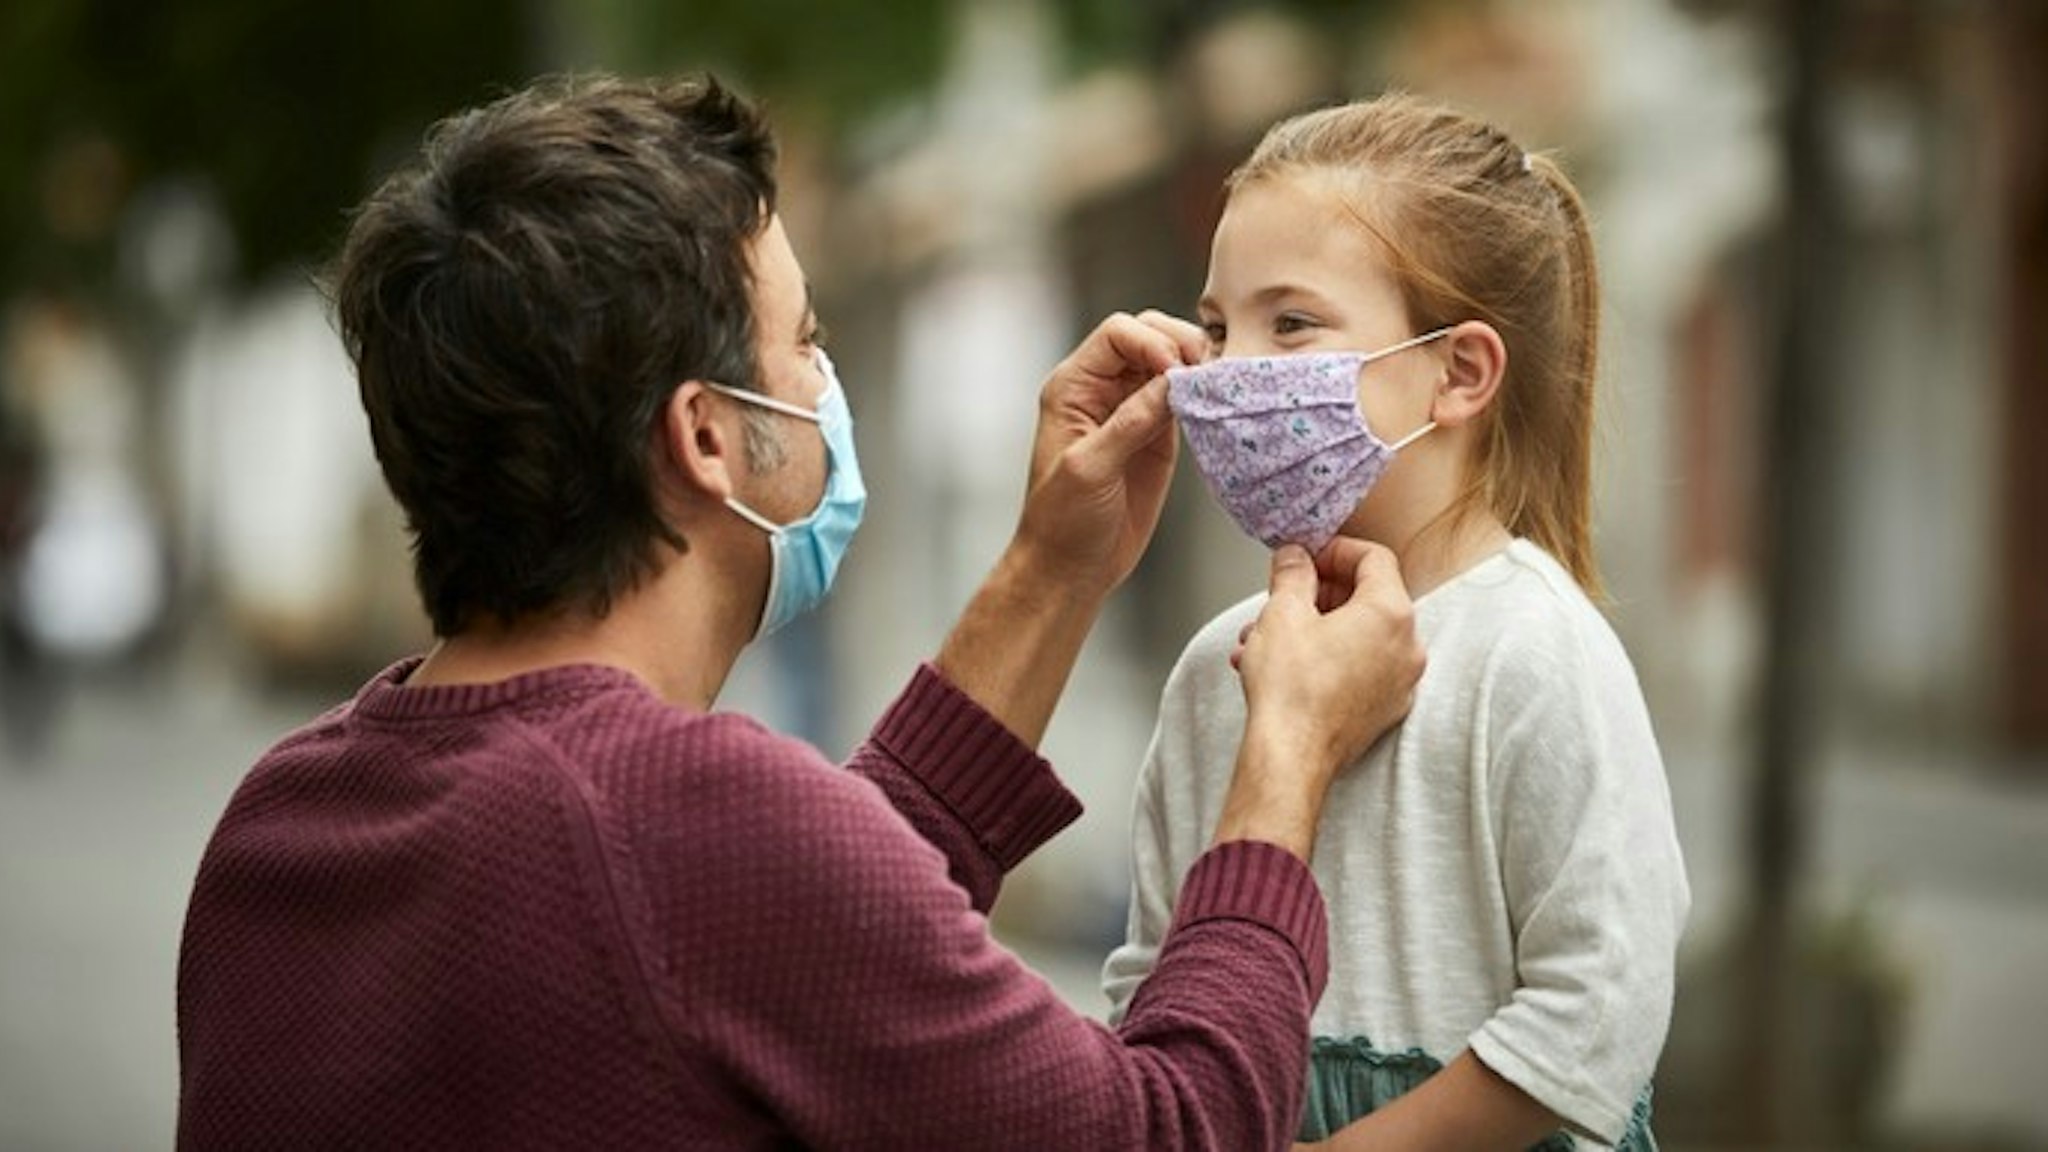 Father with surgical face mask, is putting a hand made protective face mask on his little daughter for the COVID-19 pandemic.